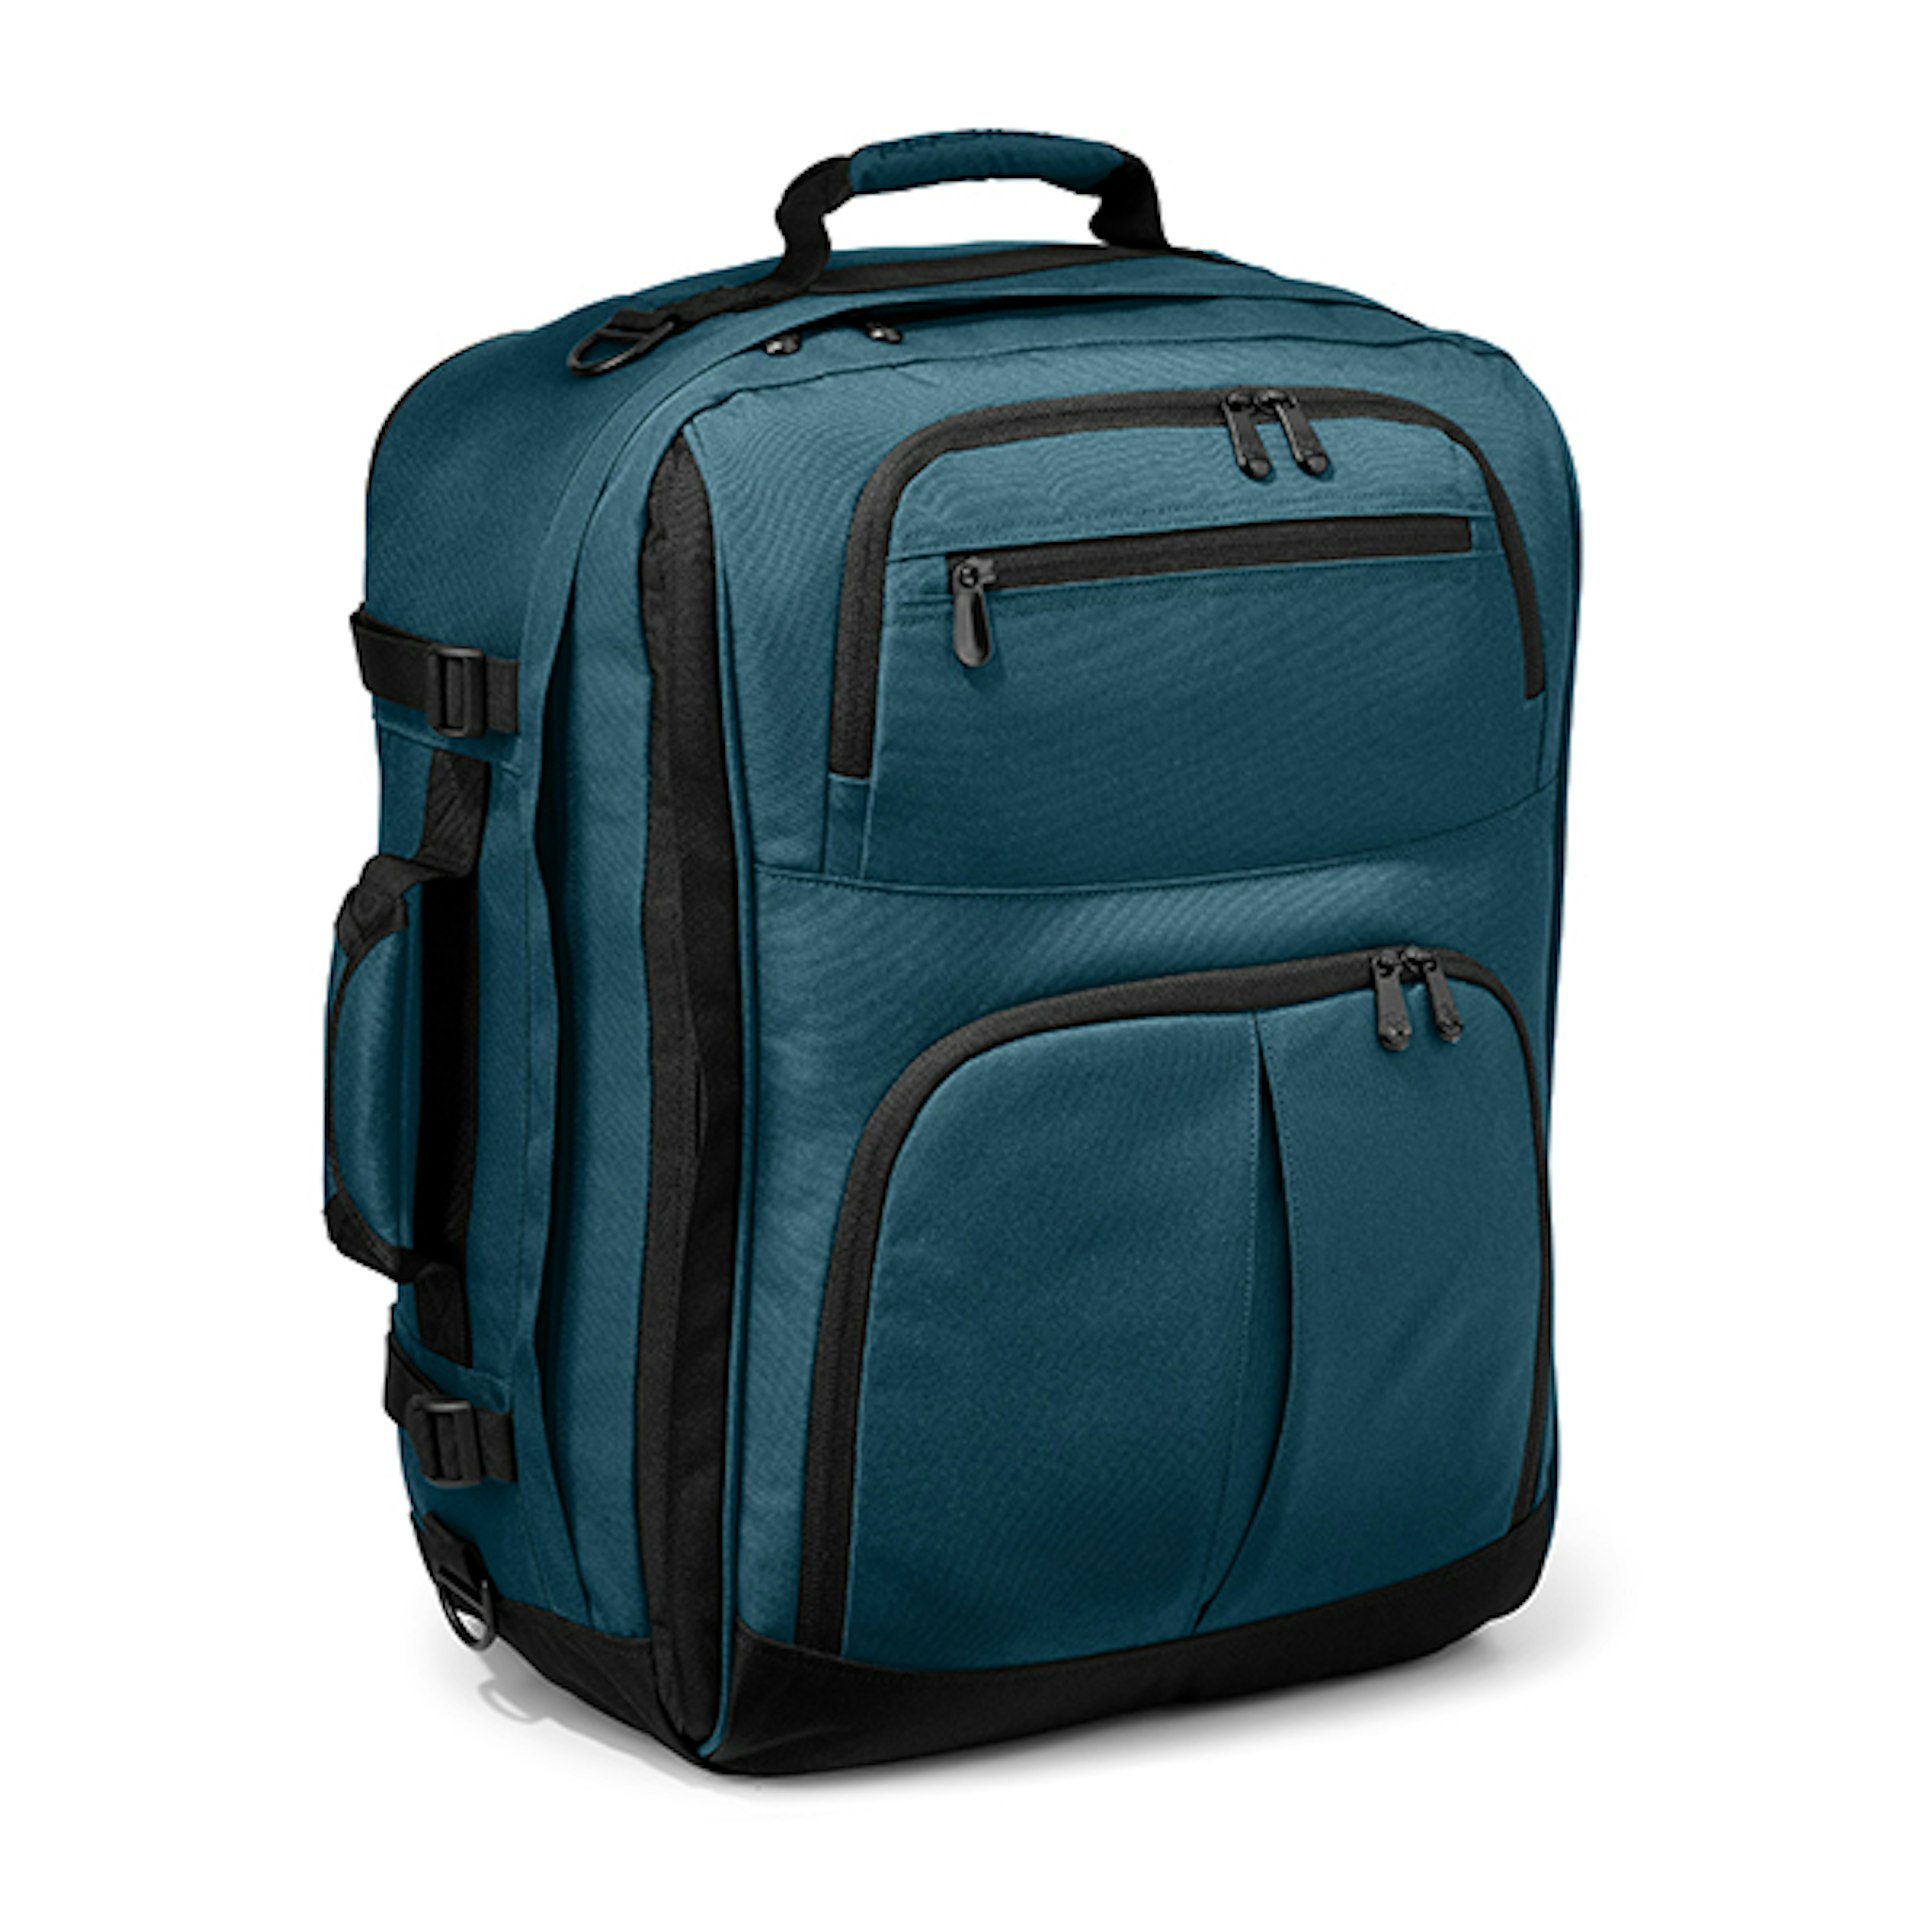 The Convertible Carry-On in blue